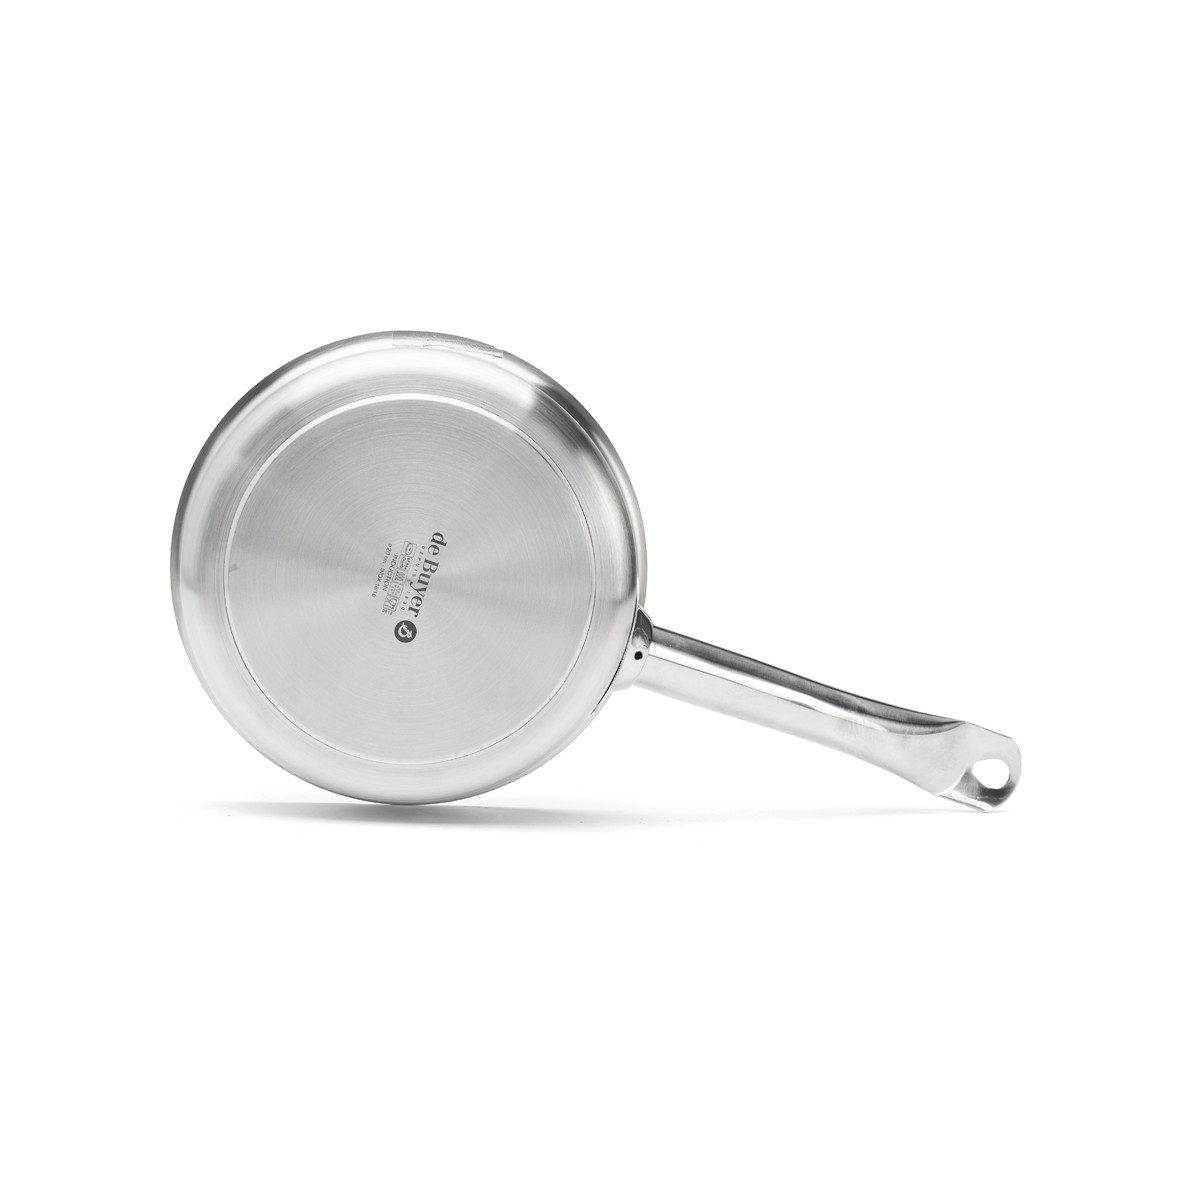 Select Stainless Steel Sauteuse 28 cm (Induction & Gas Compatible)